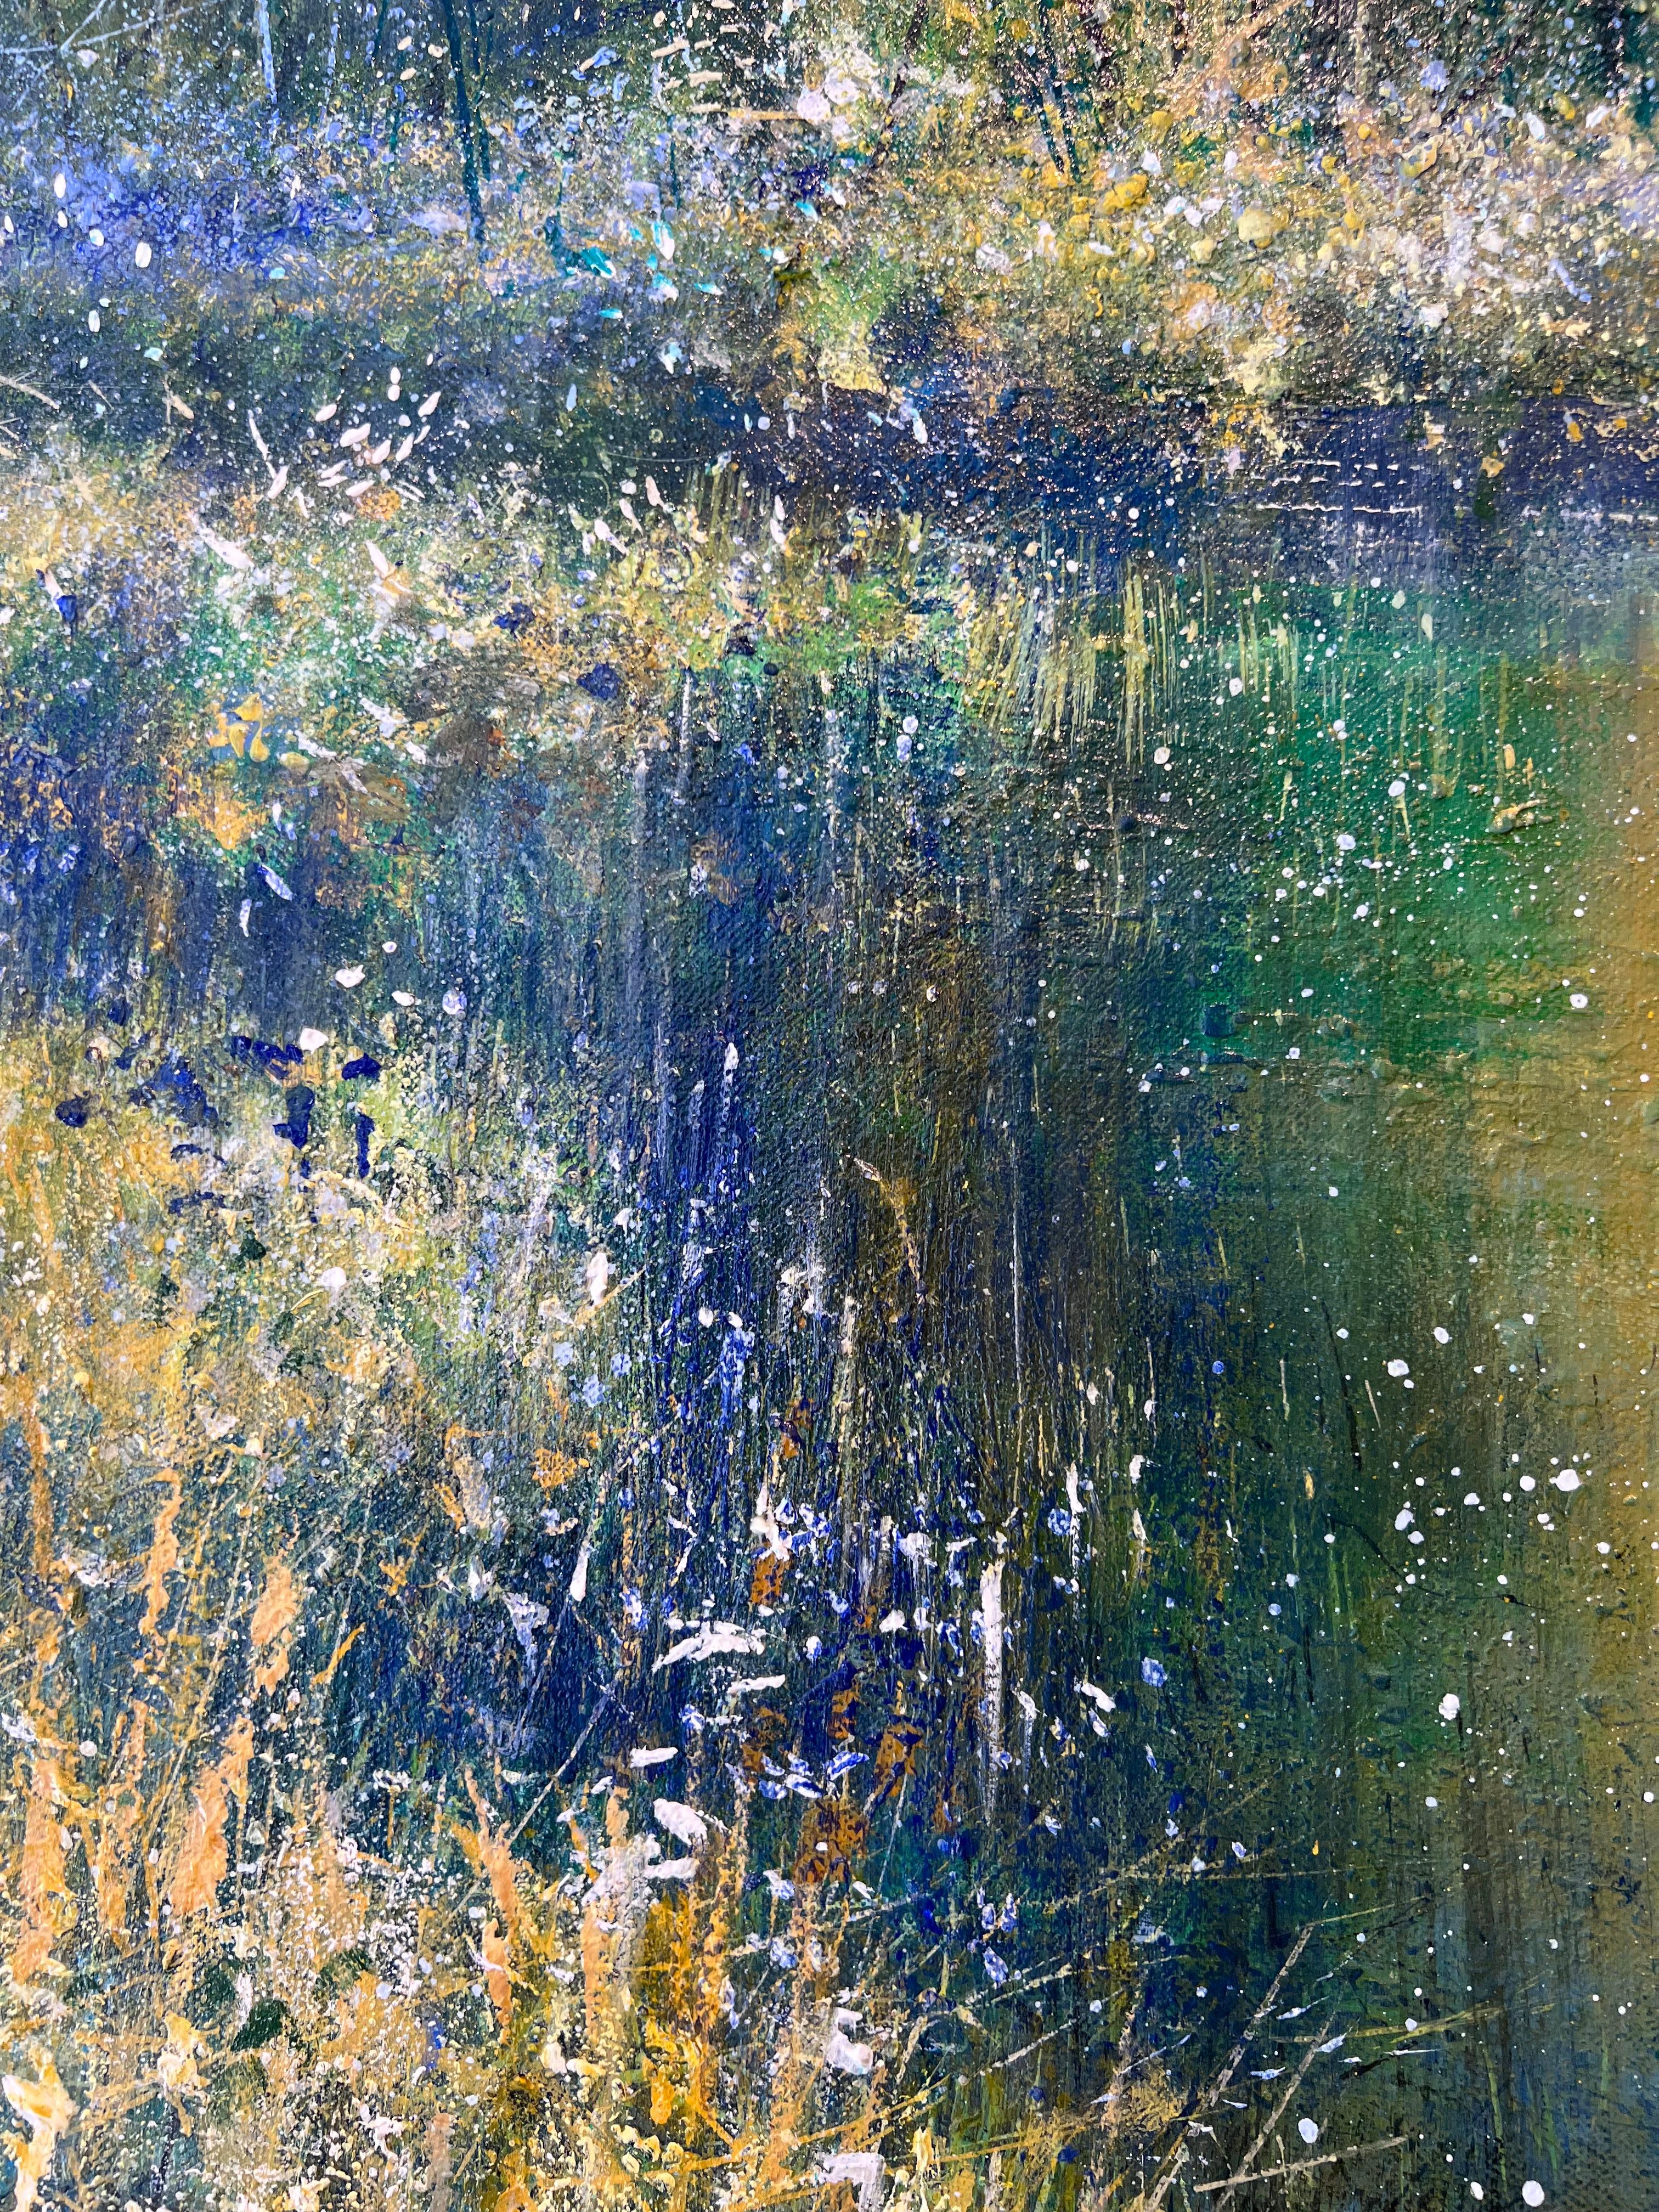 Clearing Mist on the River-original impressionism seascape painting-art for sale For Sale 1